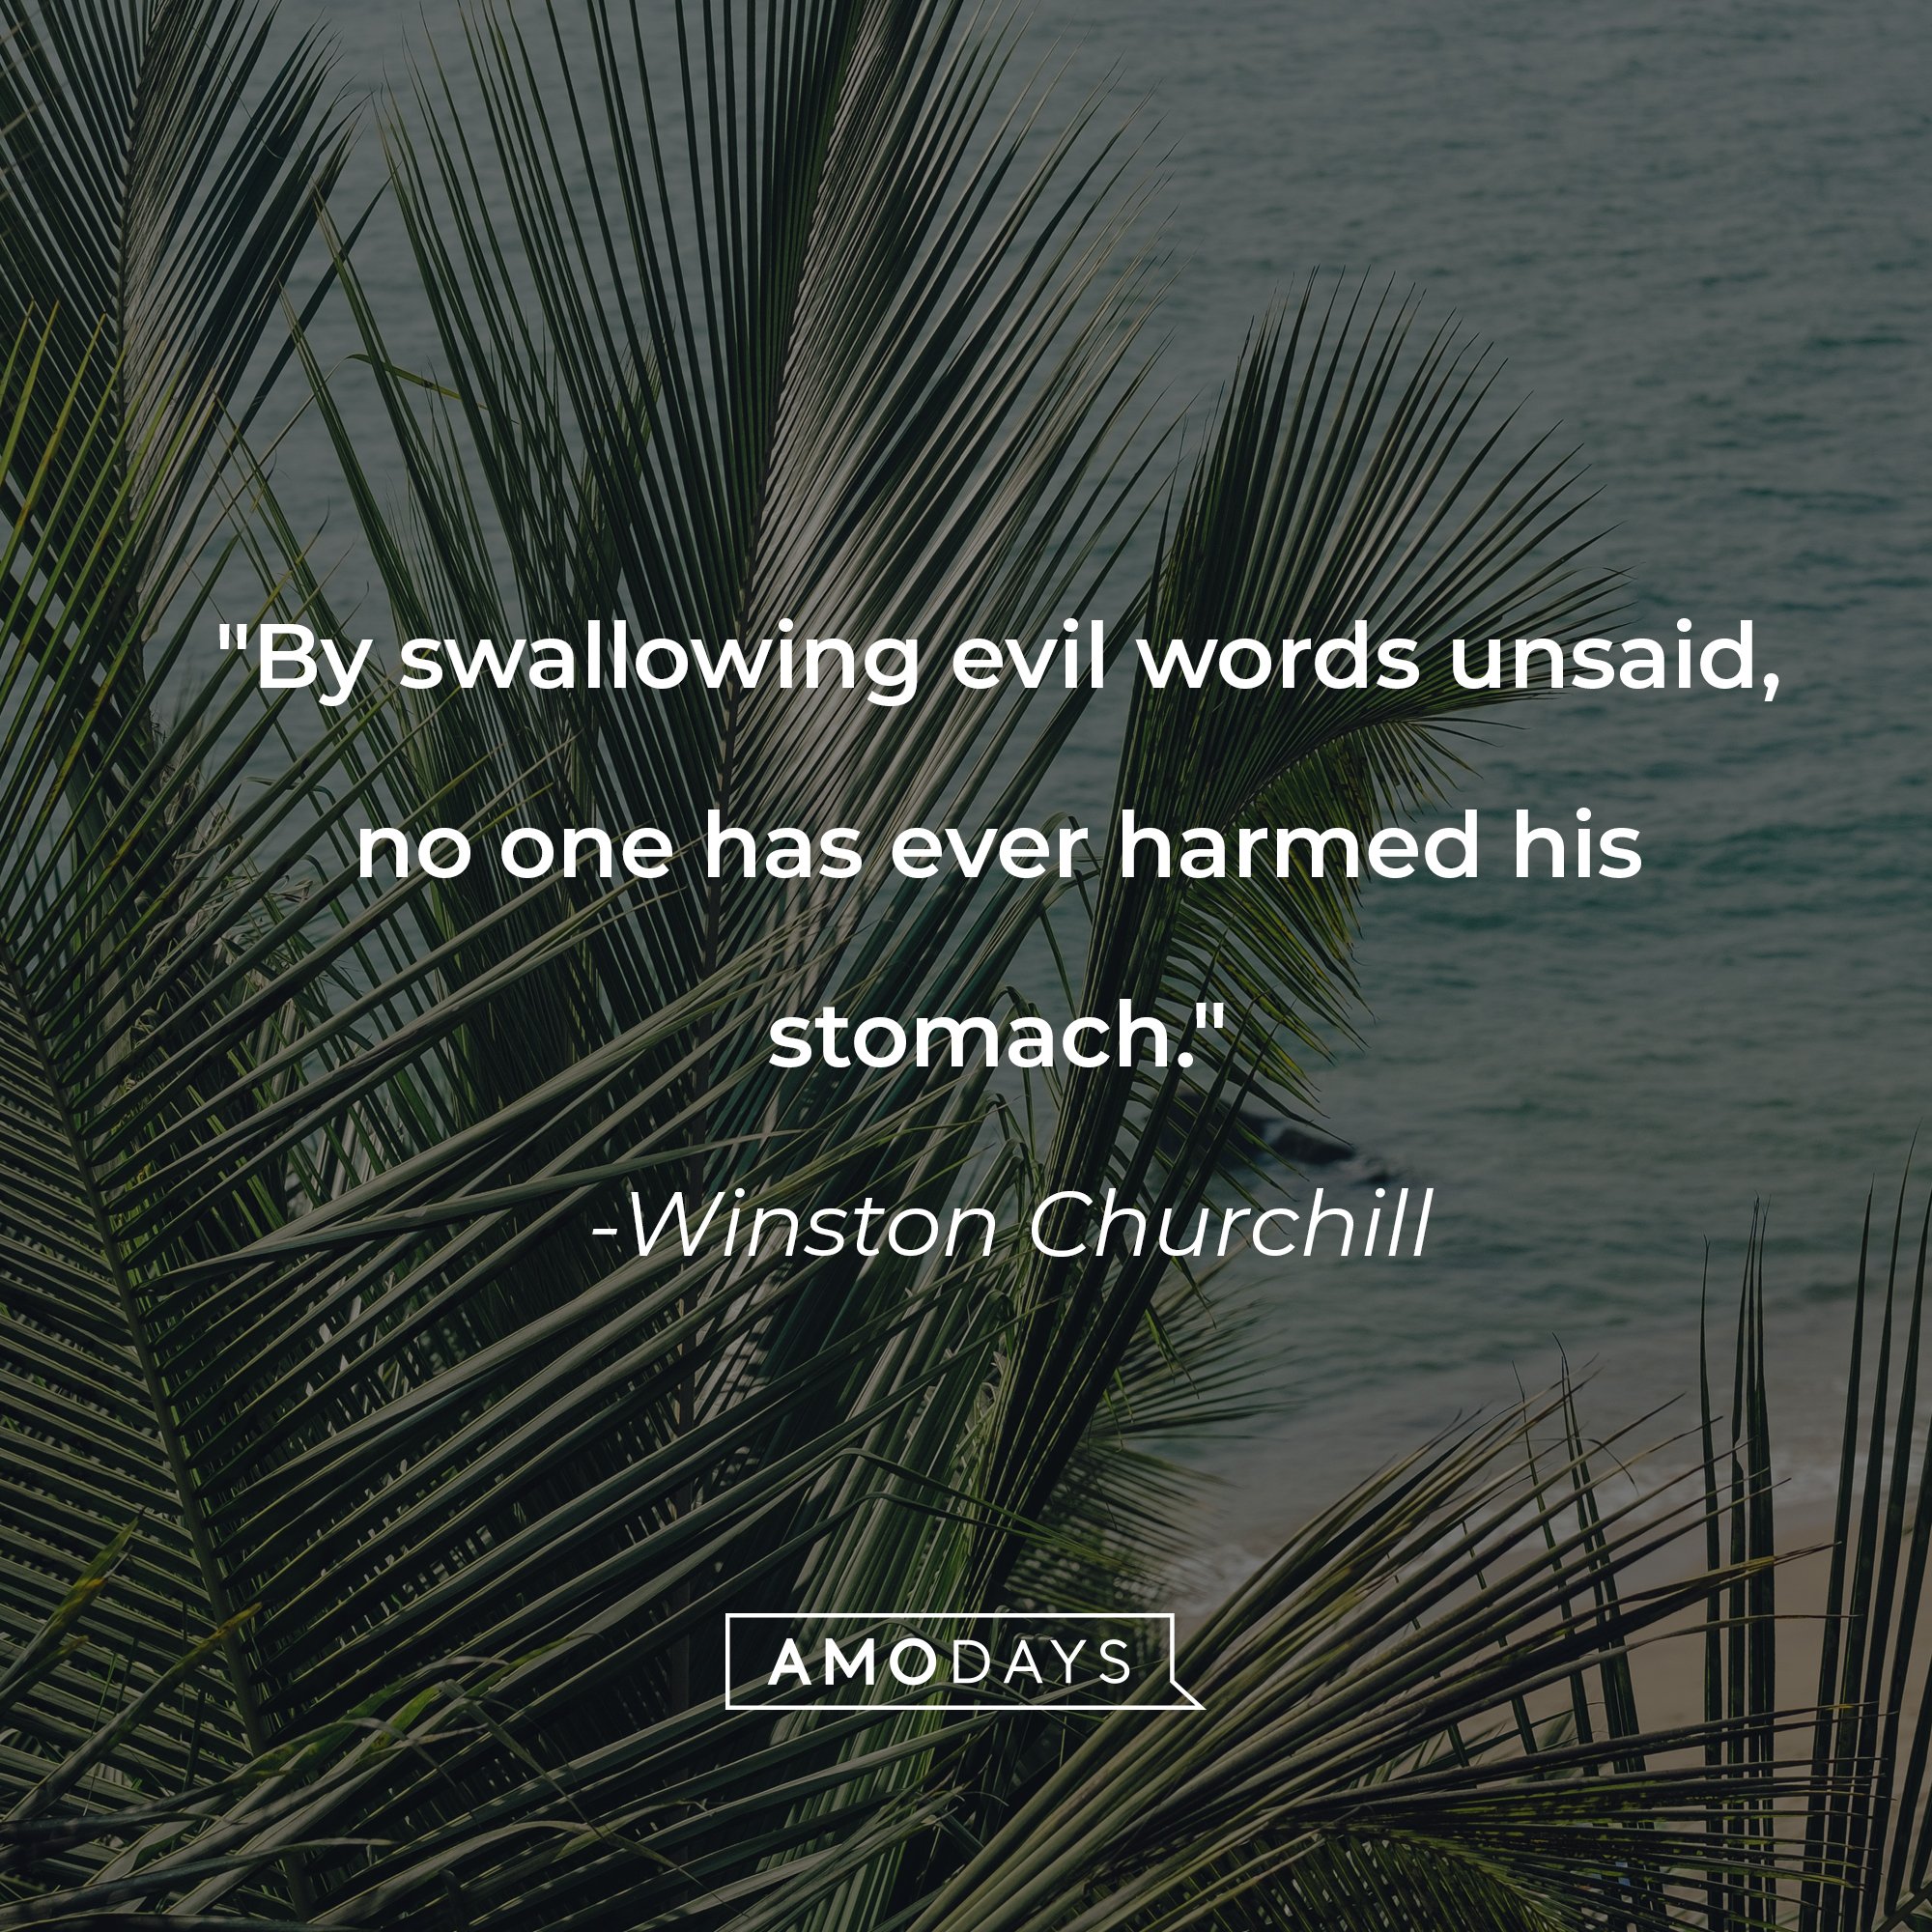 Winston Churchill's quote: "By swallowing evil words unsaid, no one has ever harmed his stomach." | Image: AmoDays